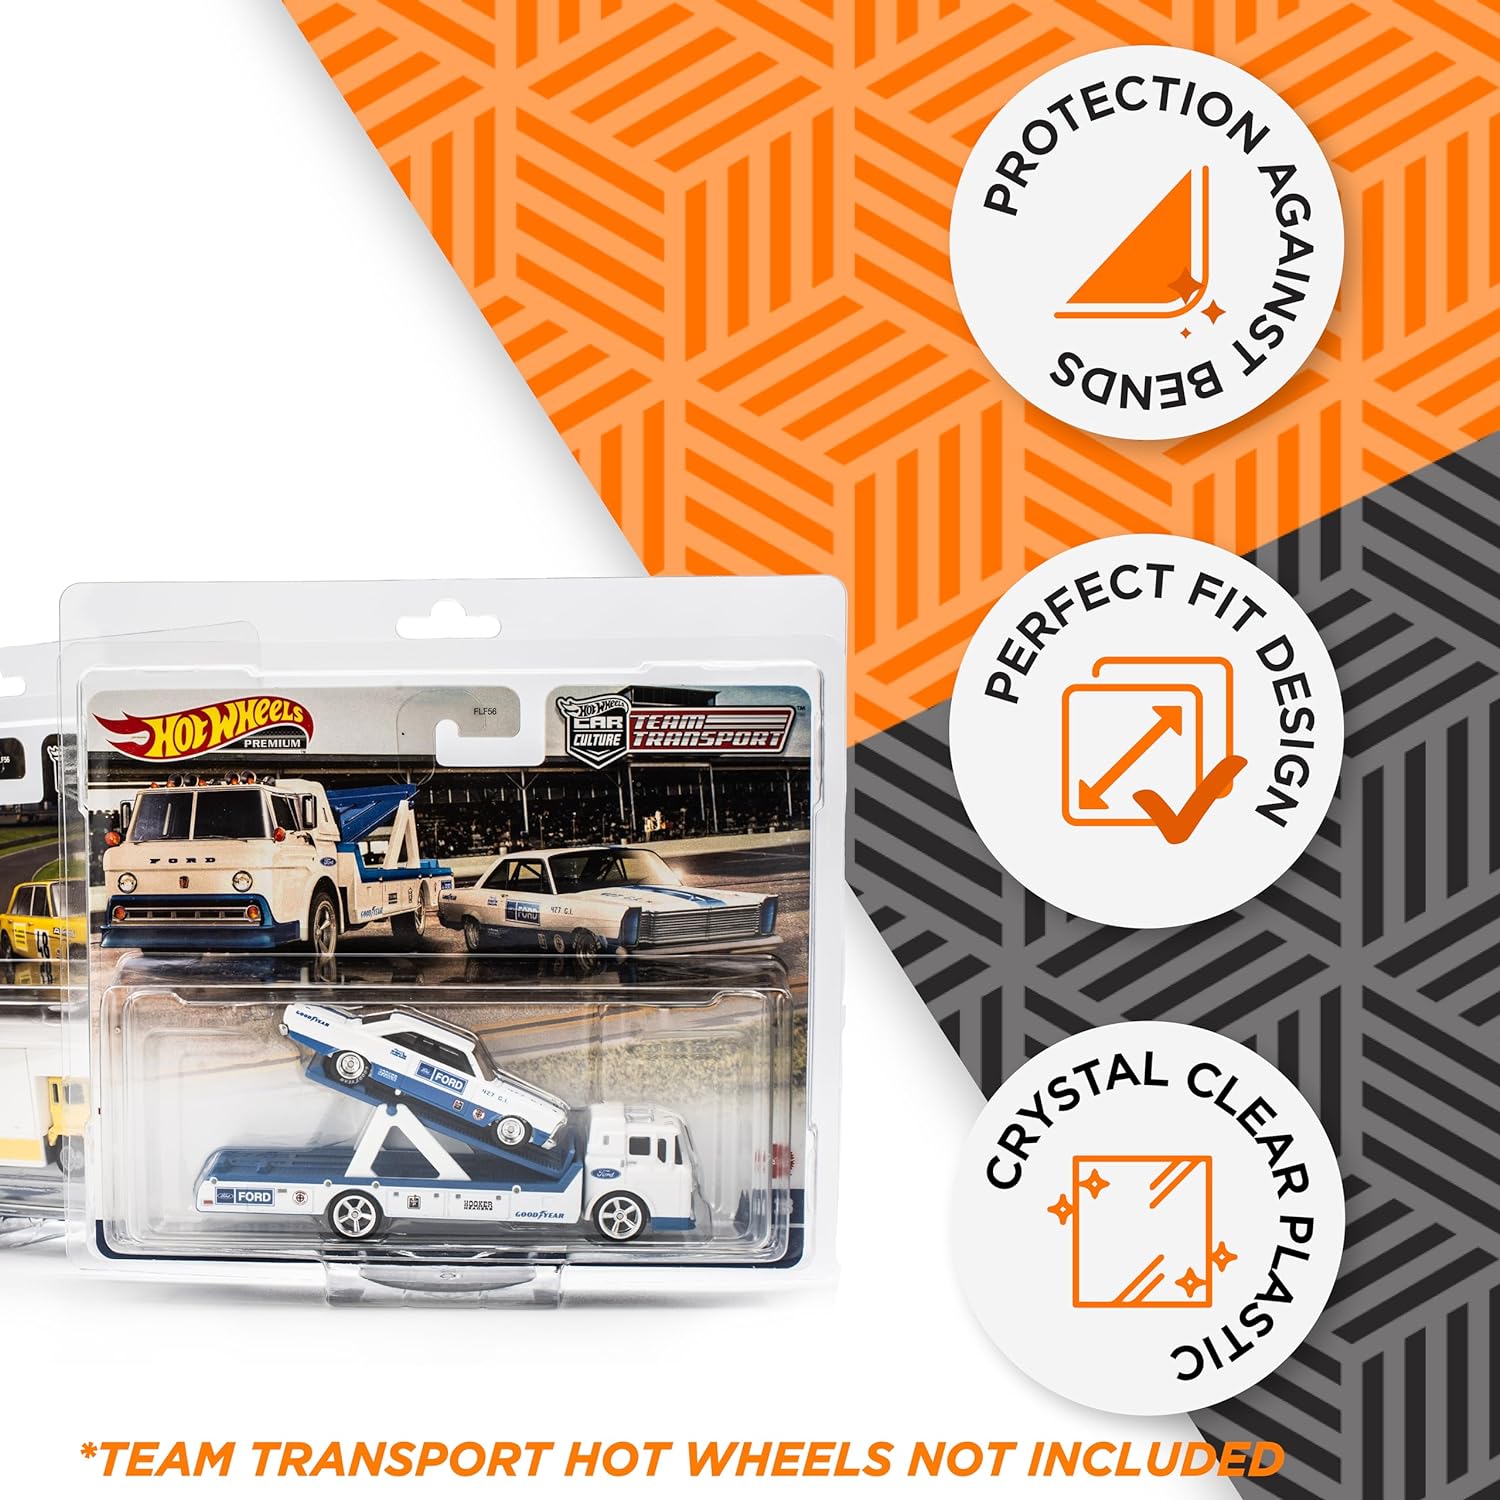 Protector Case Compatible with Team Transport  - 203x165x53mm for Hot Wheels - The Ultimate Protection for Your Best Collectibles - Friki Monkey